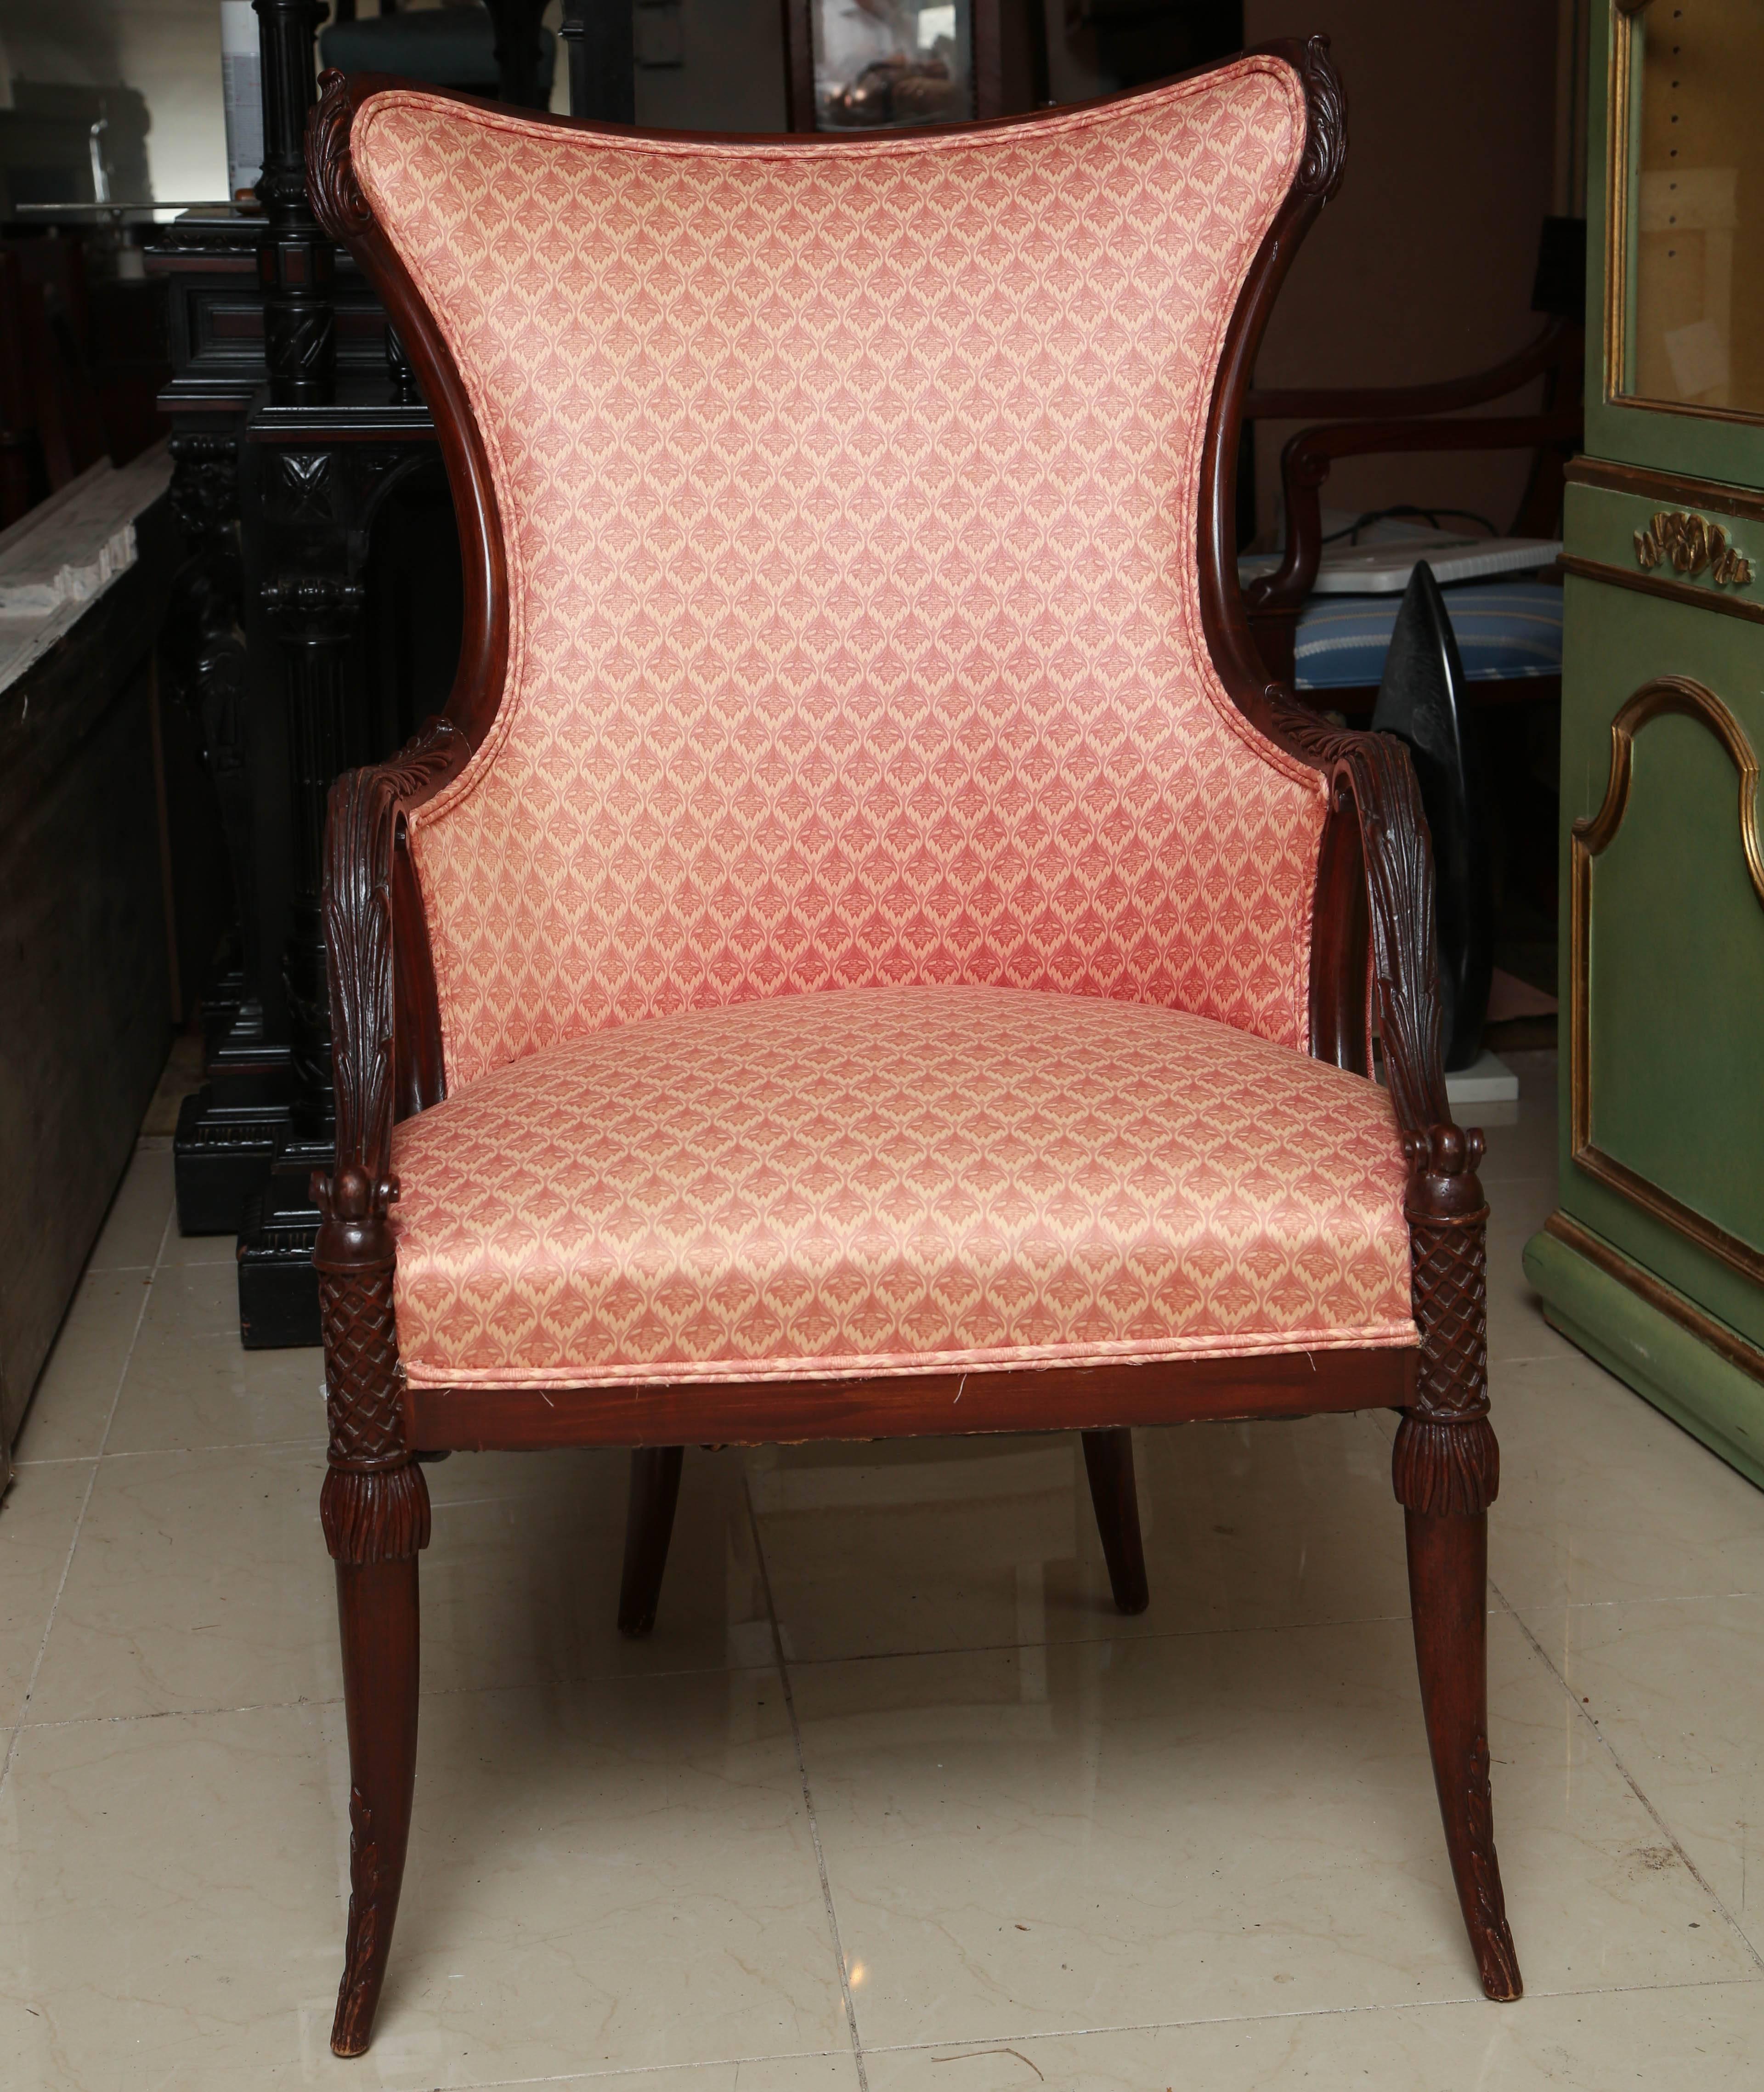 These are a very nice pair of vintage arm chairs in mahogany, the curved backs with leaf carved arms circular slightly flared and tapered legs. The fabric is very good and the chairs are very sturdy and in good condition.
Measures: Height of back